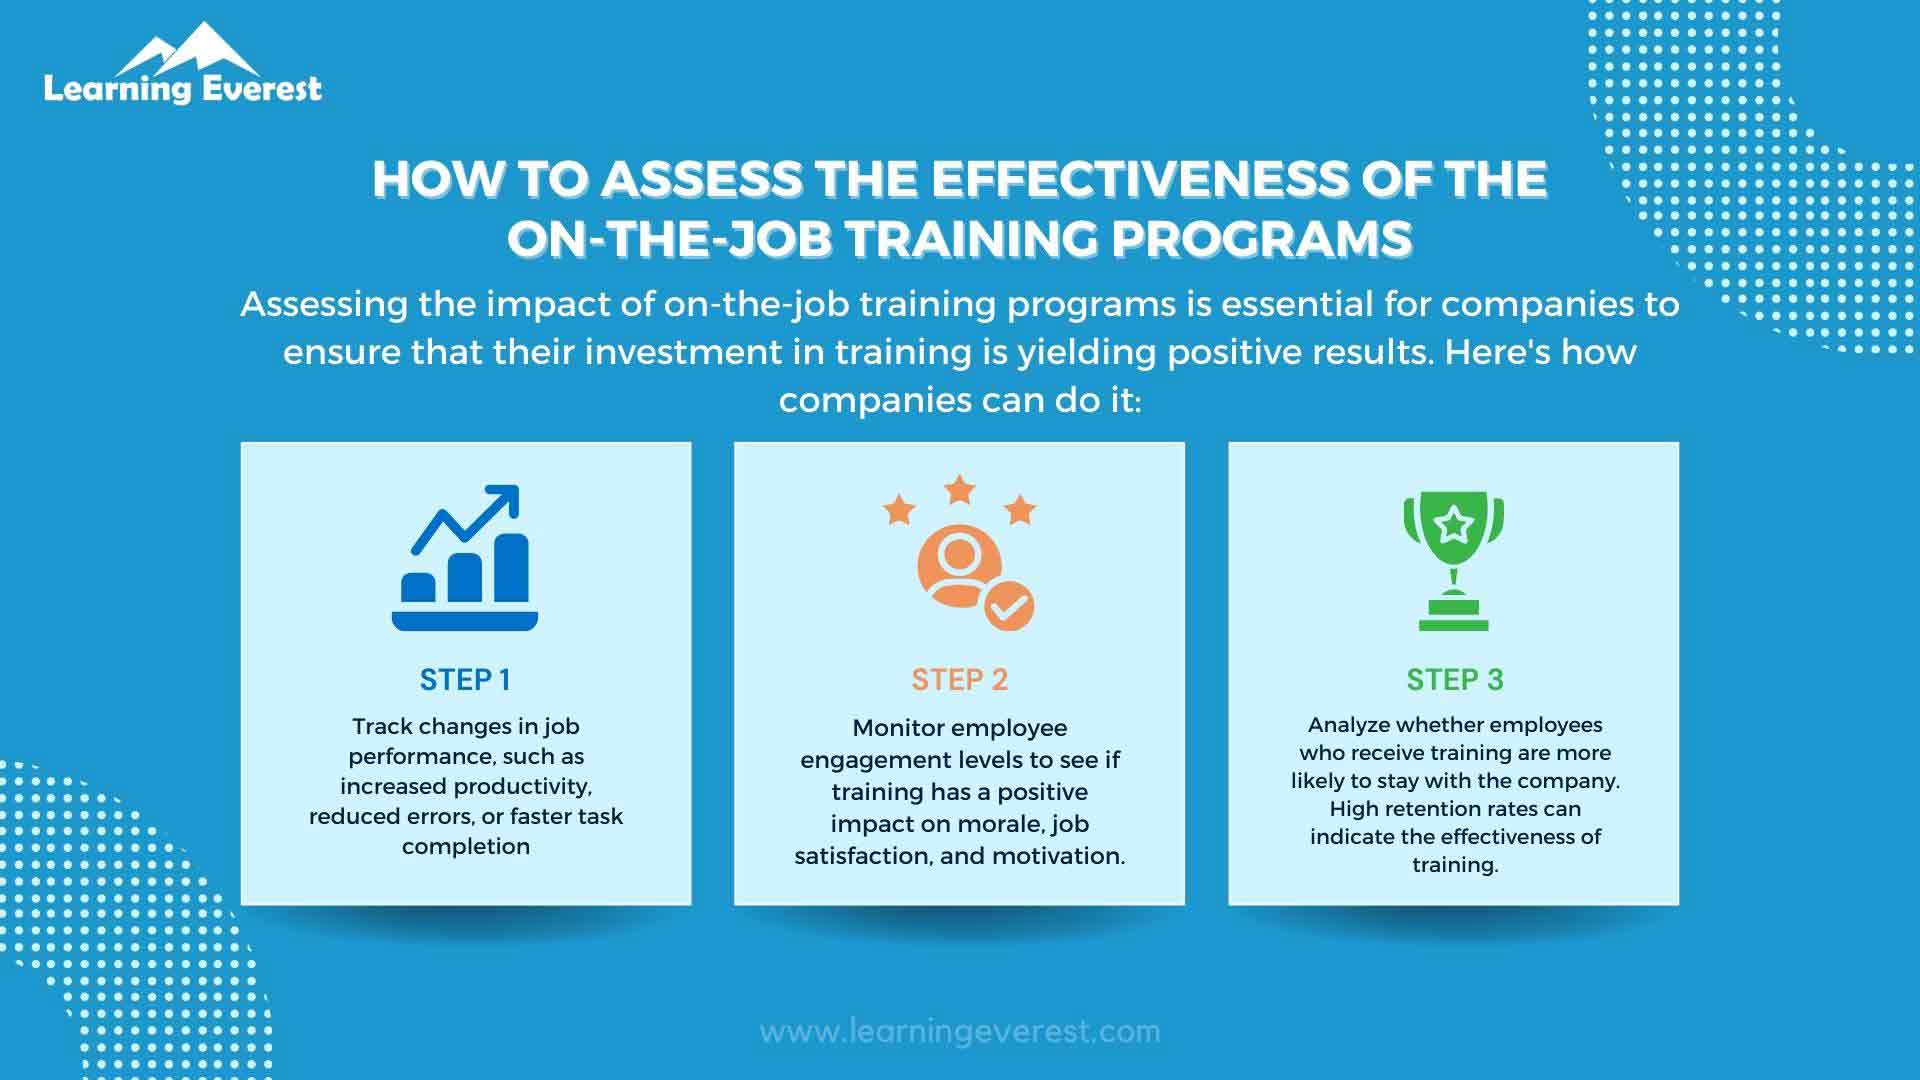 How to assess the effectiveness of the on-the-job training programs